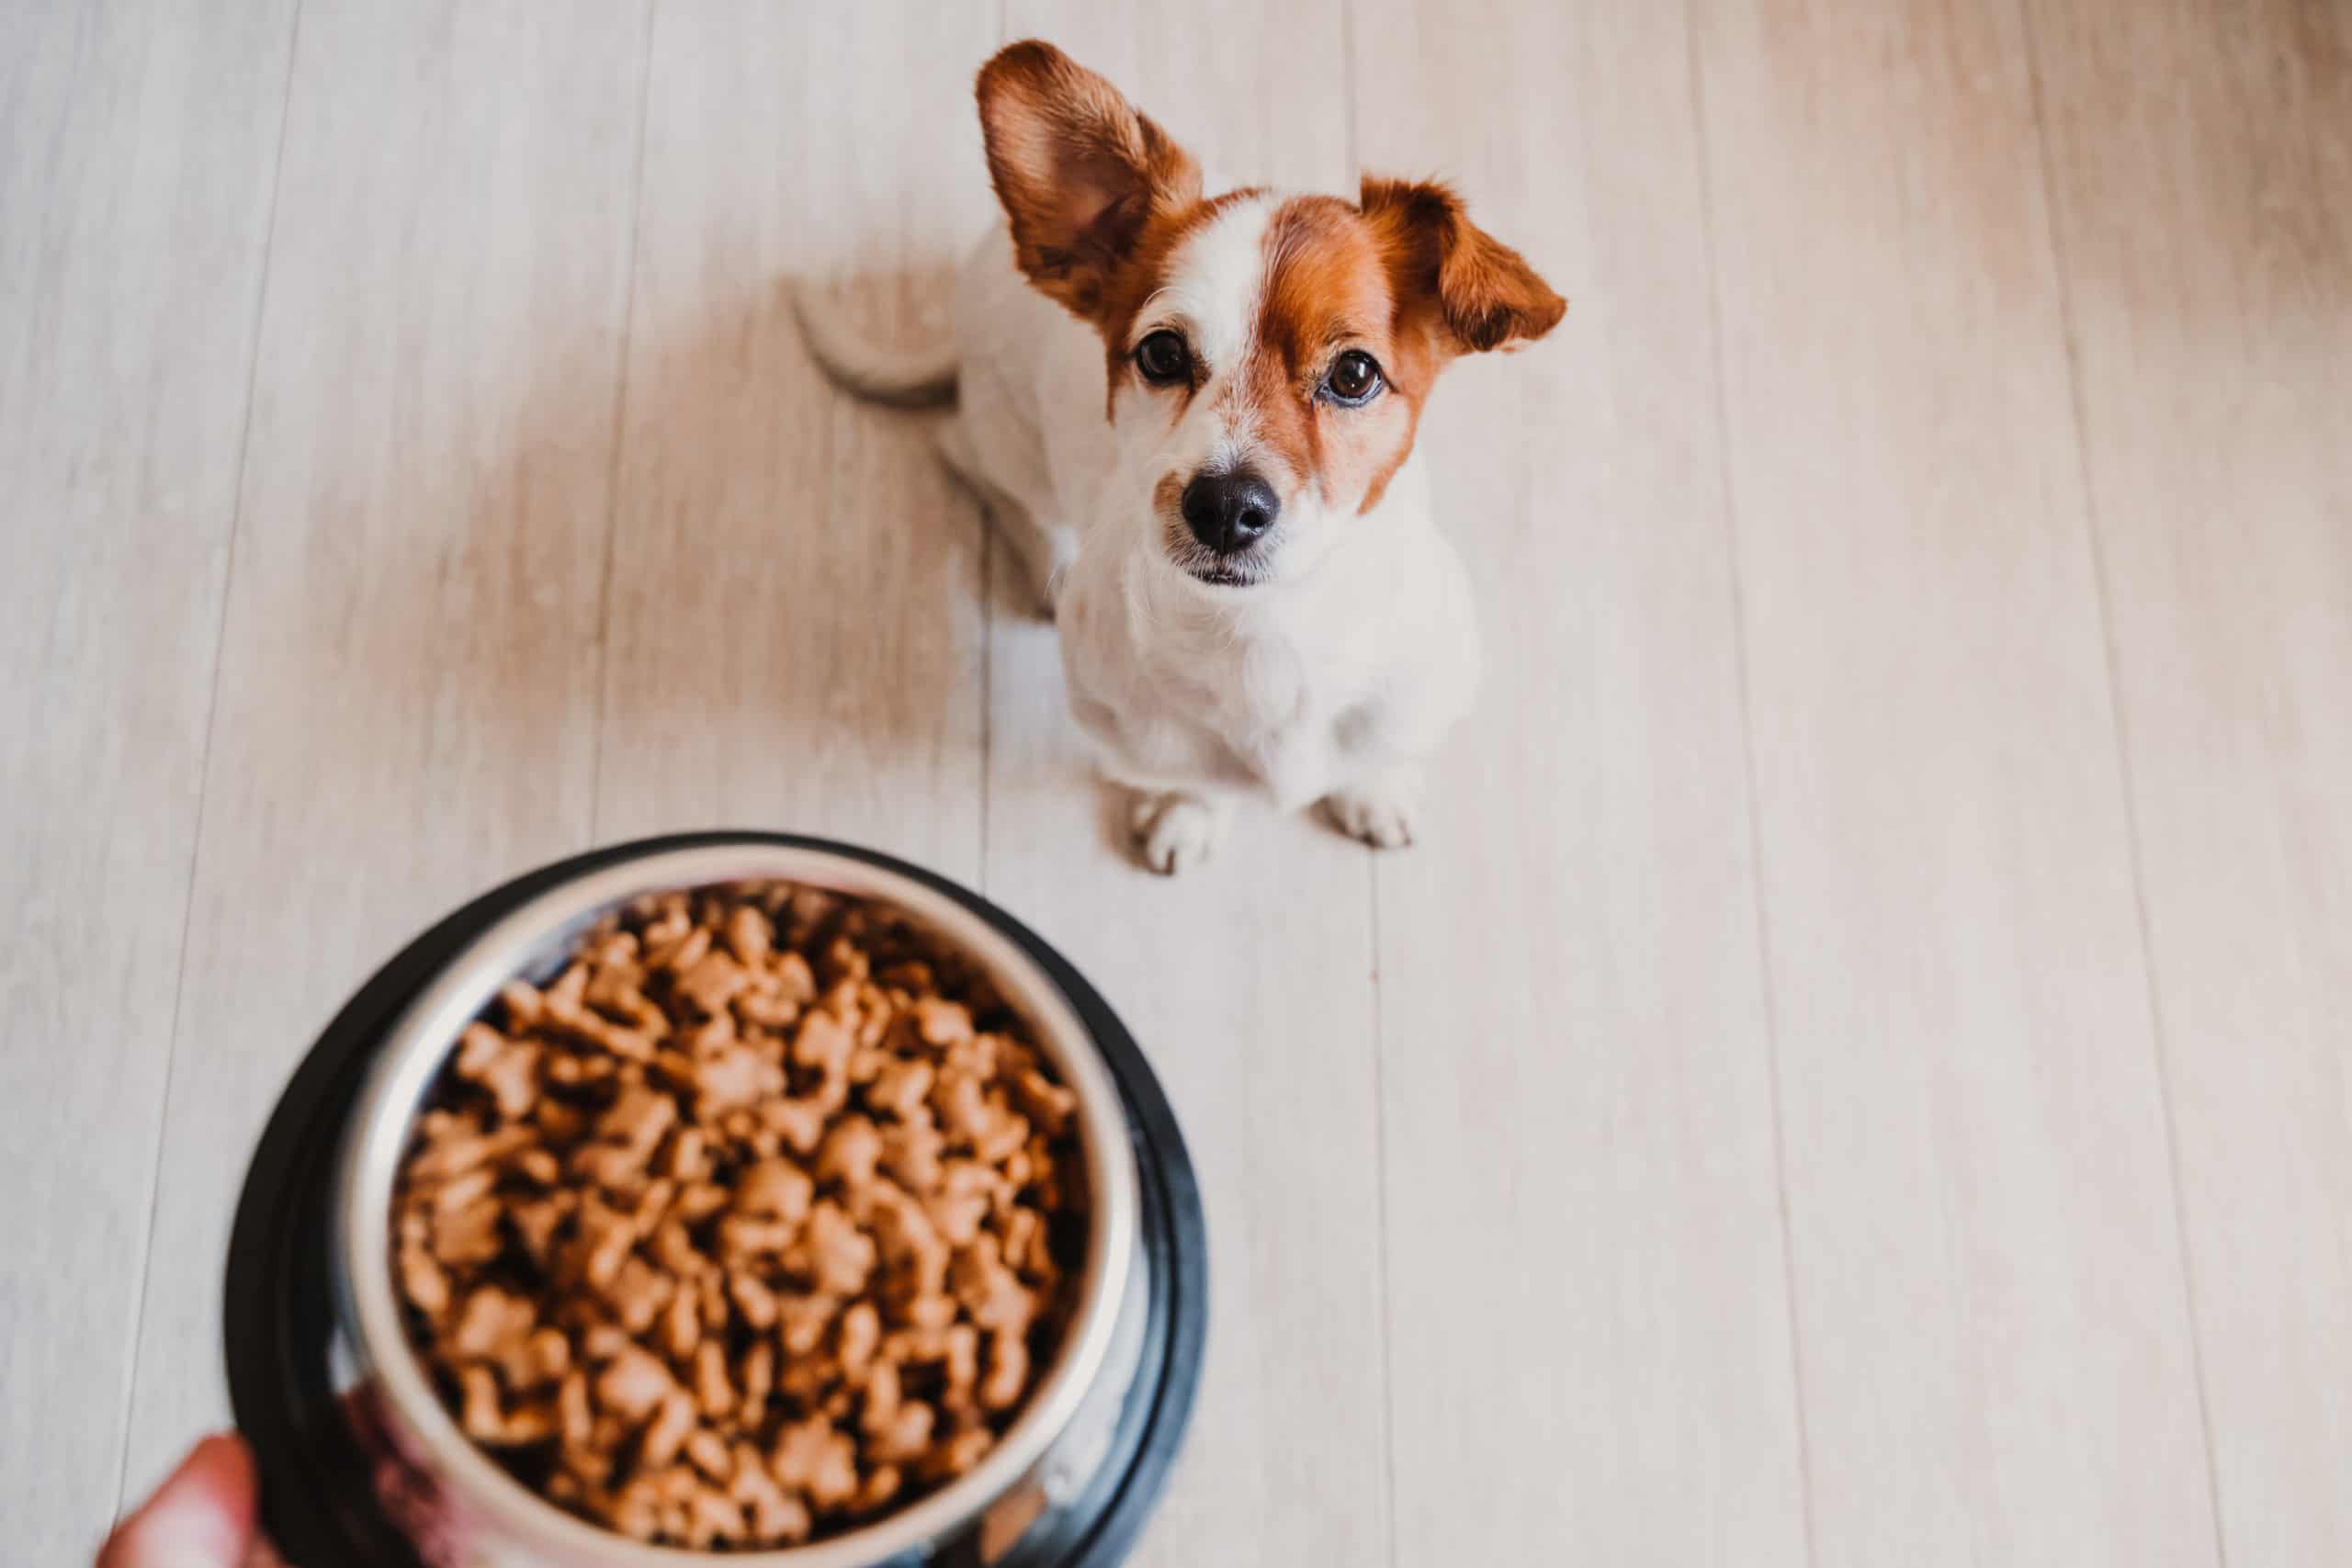 Why won’t my dog eat without me?